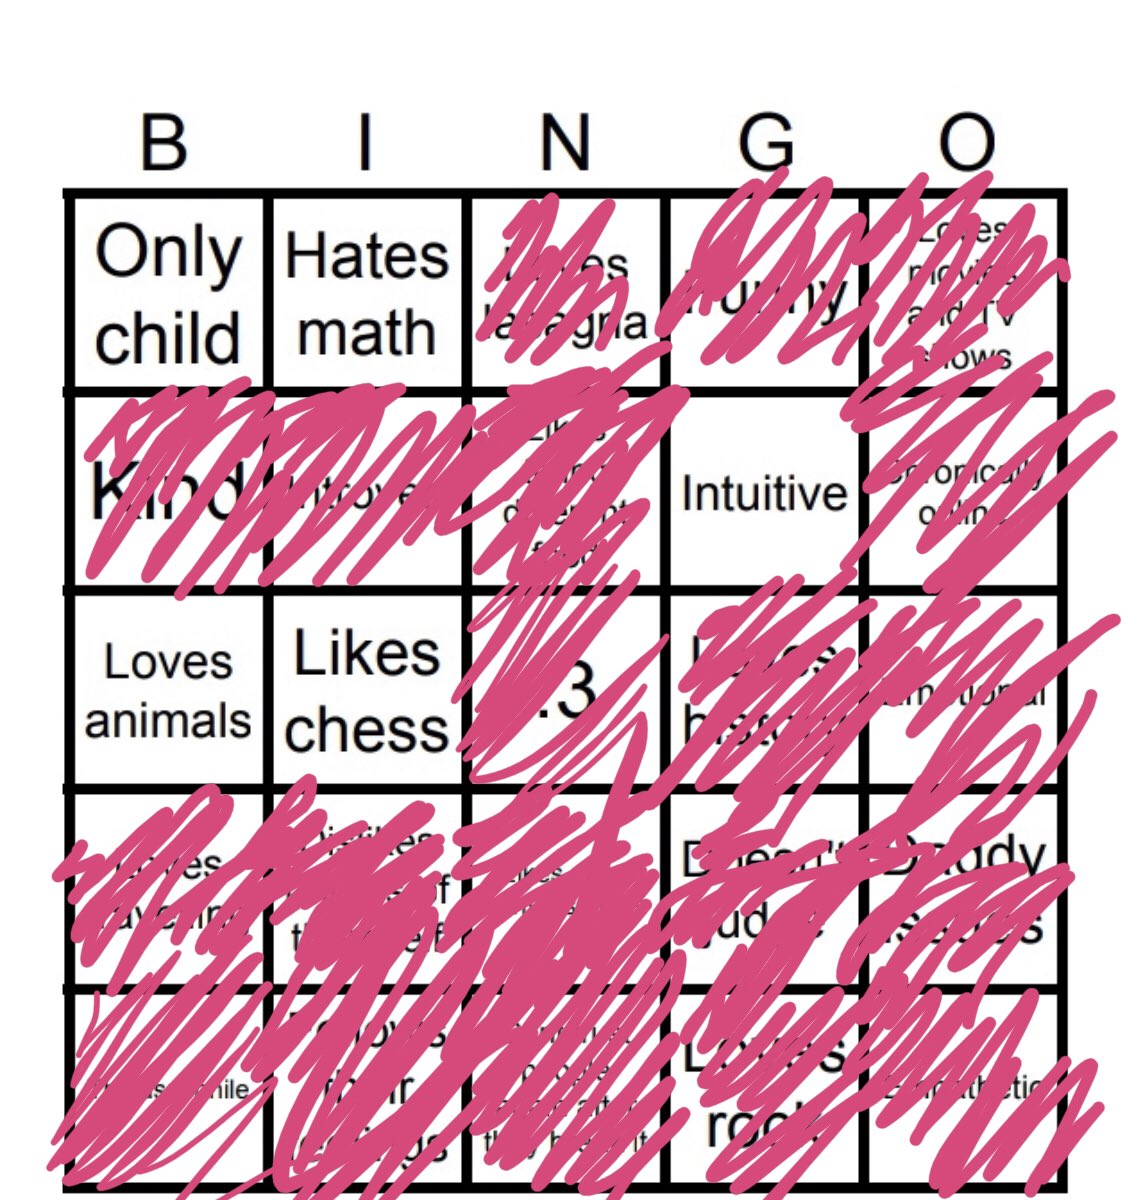 @mahadmalik_20 4 bingos is kinda crazy. also i dont know how to play chess but i find it sooo interesting and i love it as a mindsport so yea